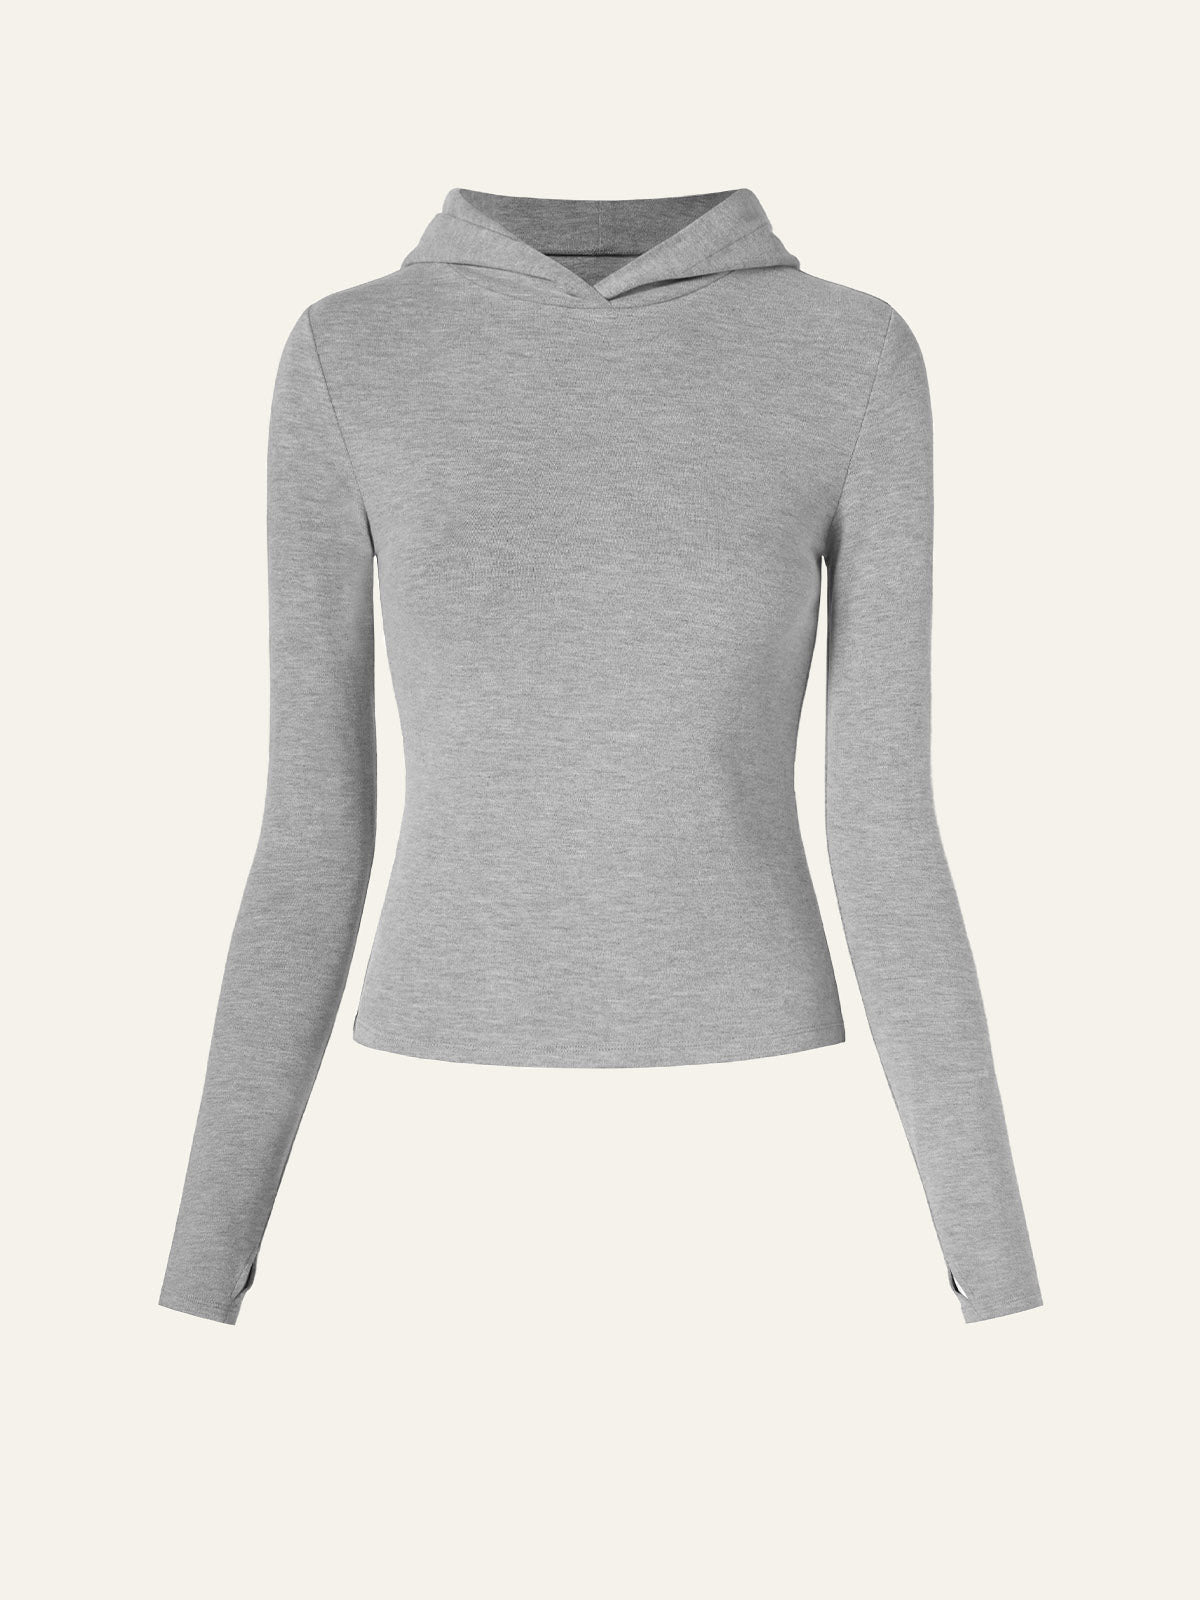 GAIAM WOMEN'S LIGHTWEIGHT Hooded Top with Thumbholes Size M Charcoal Grey  EUC £17.10 - PicClick UK